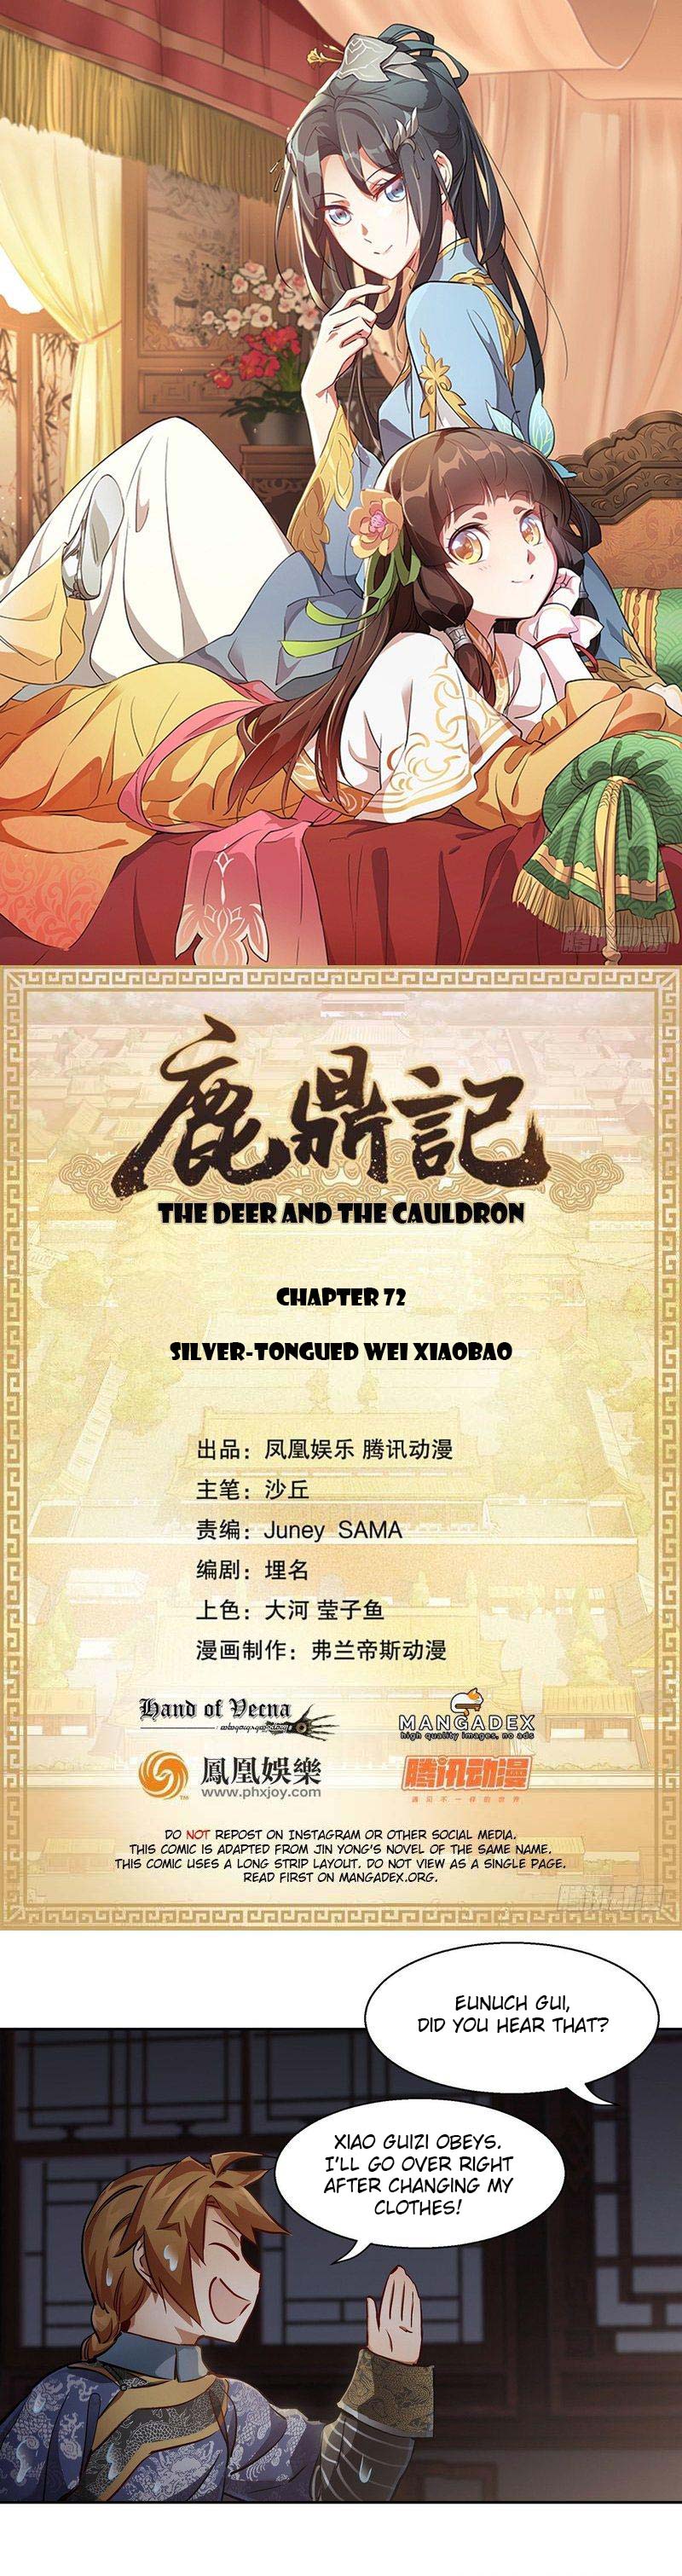 The Deer and the Cauldron Ch. 72 Silver Tongued Wei Xiaobao